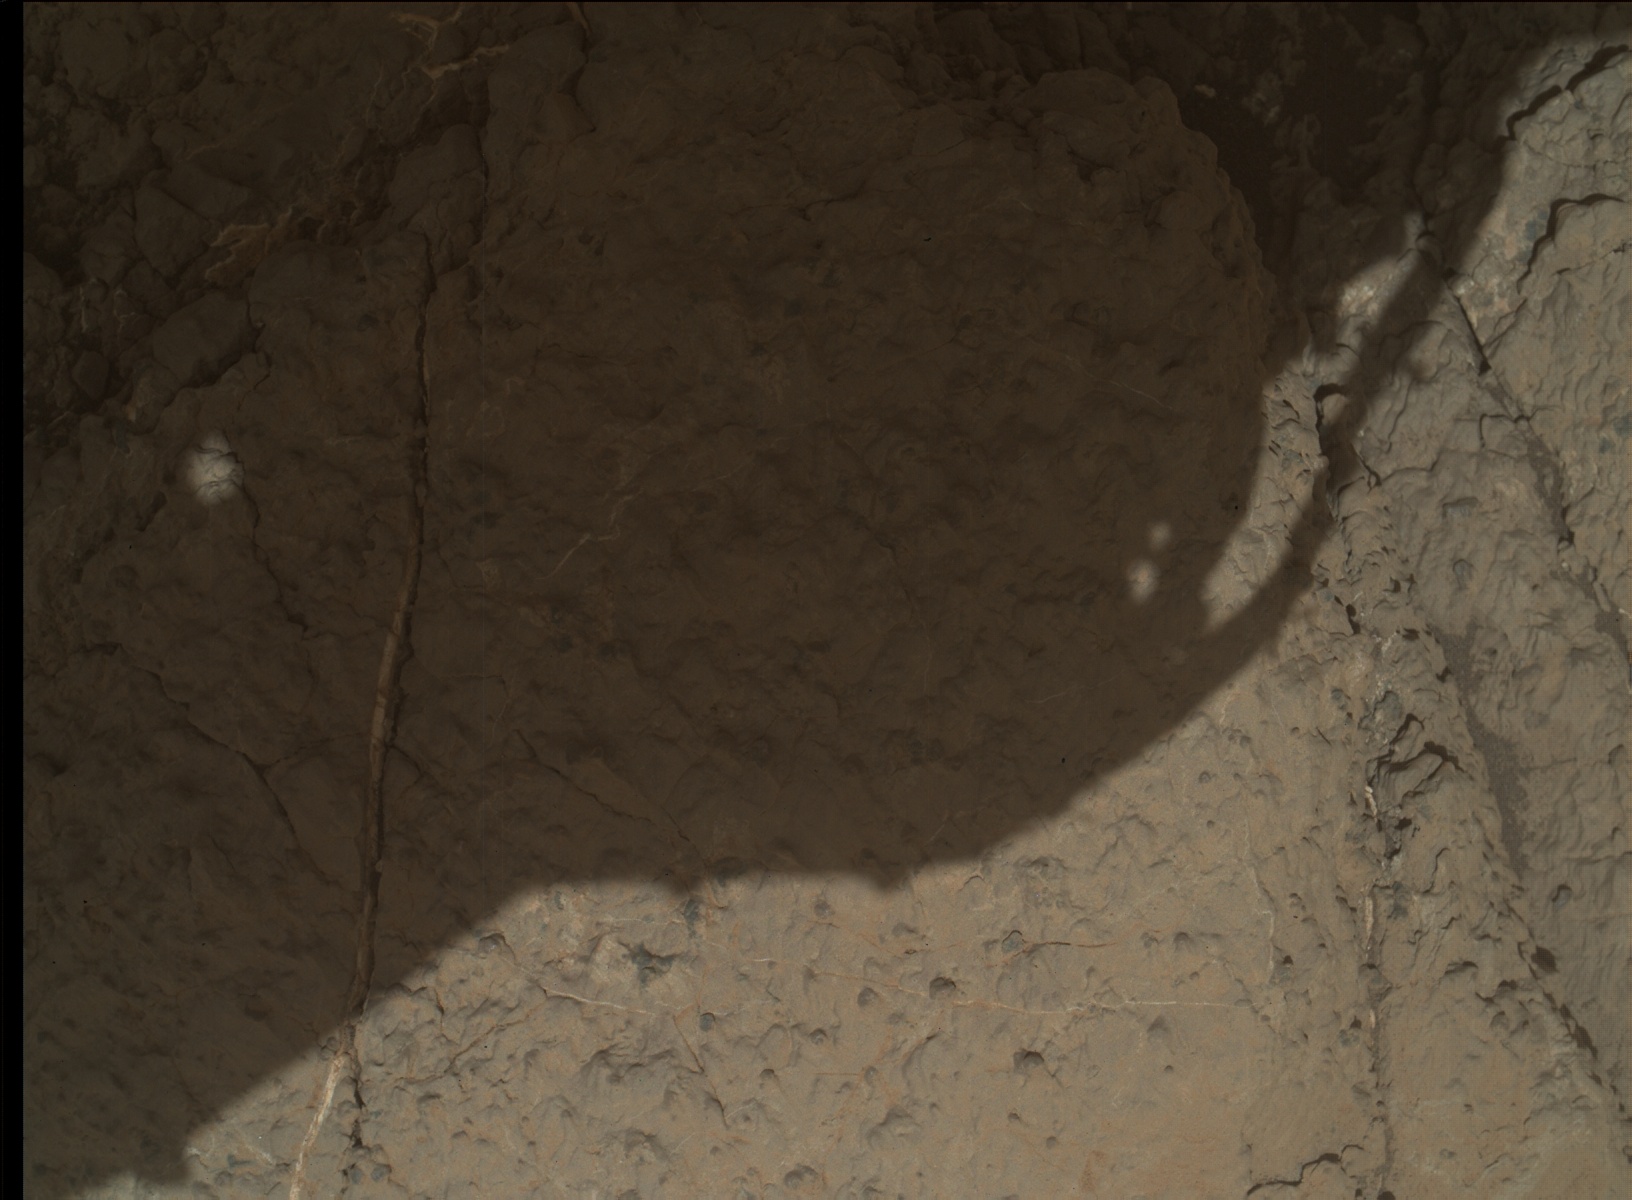 Nasa's Mars rover Curiosity acquired this image using its Mars Hand Lens Imager (MAHLI) on Sol 2611